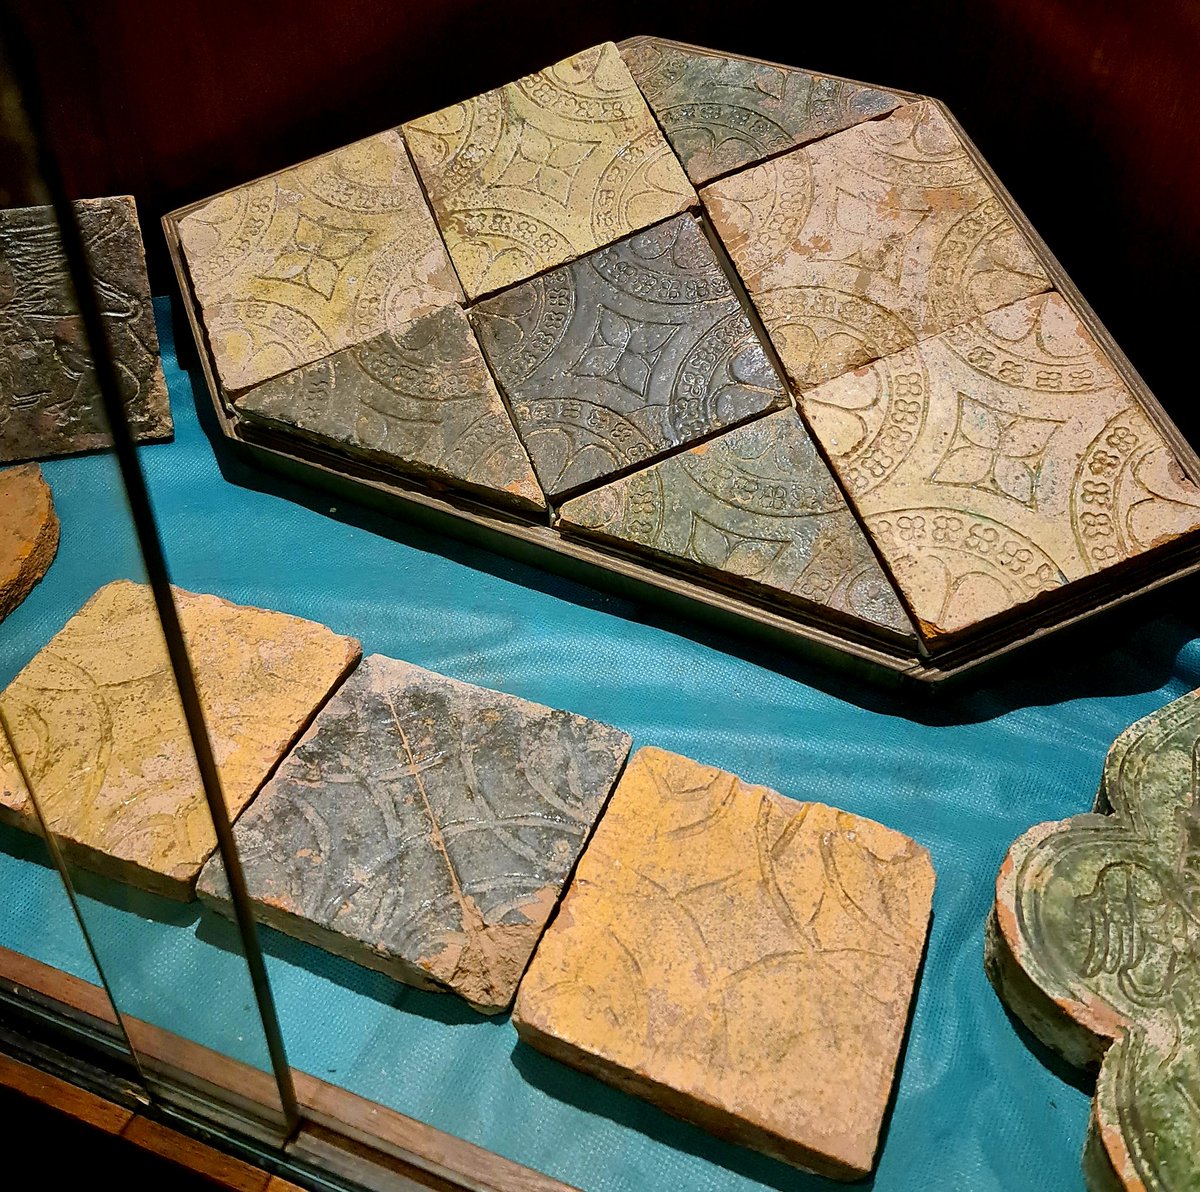 Decorated medieval floor tiles from Sandwell Priory.  The Benedictine monastery in West Bromwich, then in Staffordshire, was dissolved in 1525 by Cardinal Wolsey – long before the Dissolution of the Monasteries in 1536. #tilesontuesday #westbromwich #staffordshire